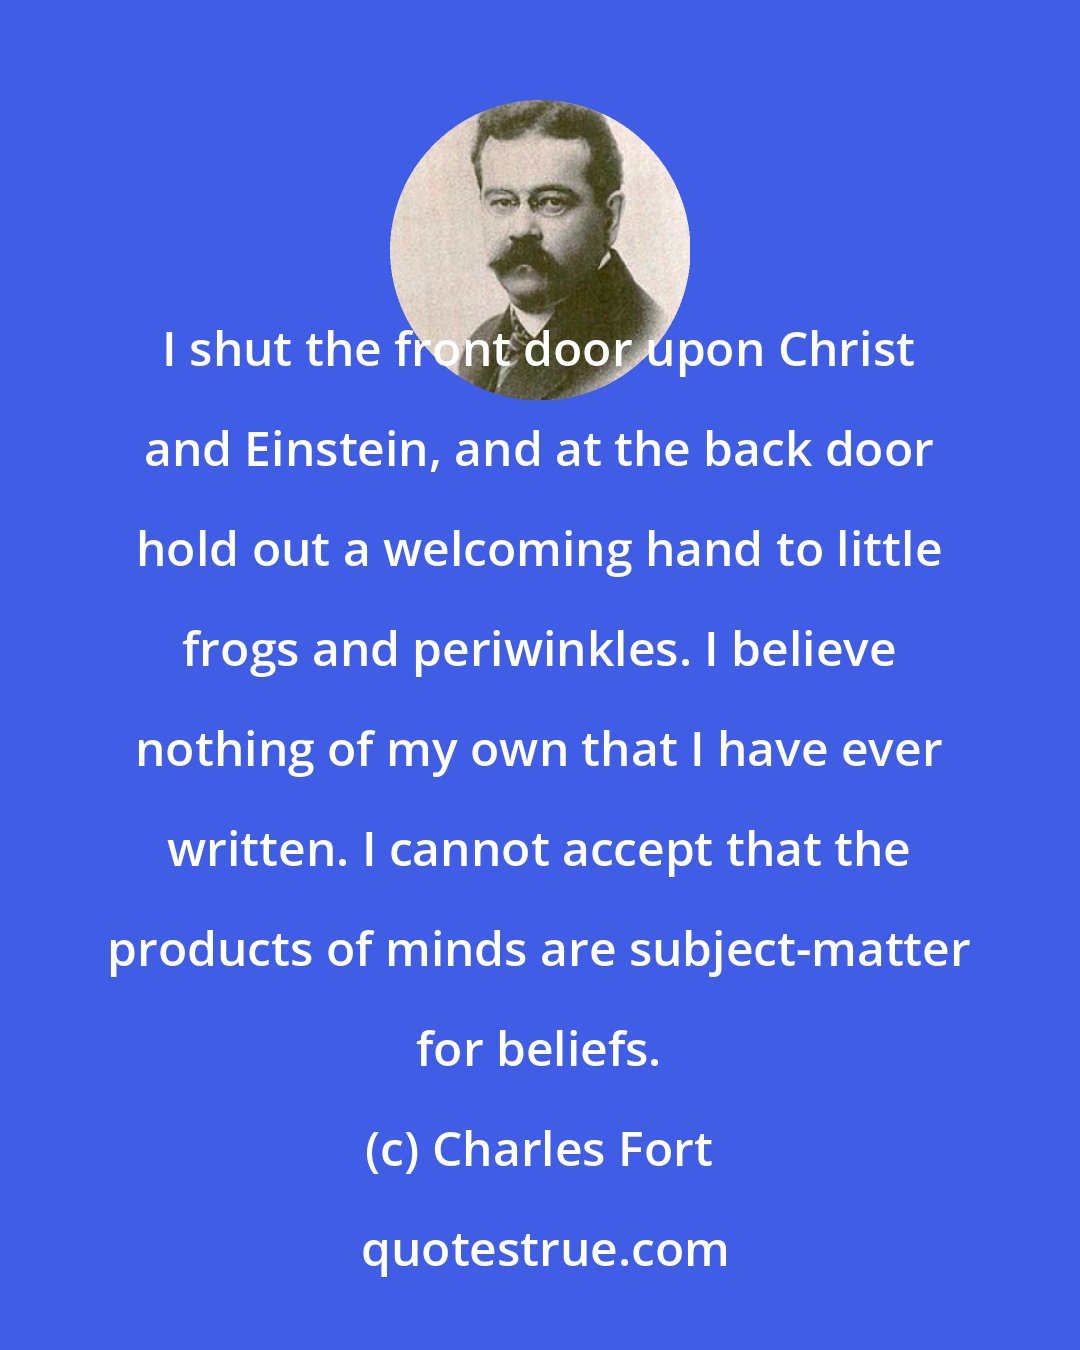 Charles Fort: I shut the front door upon Christ and Einstein, and at the back door hold out a welcoming hand to little frogs and periwinkles. I believe nothing of my own that I have ever written. I cannot accept that the products of minds are subject-matter for beliefs.